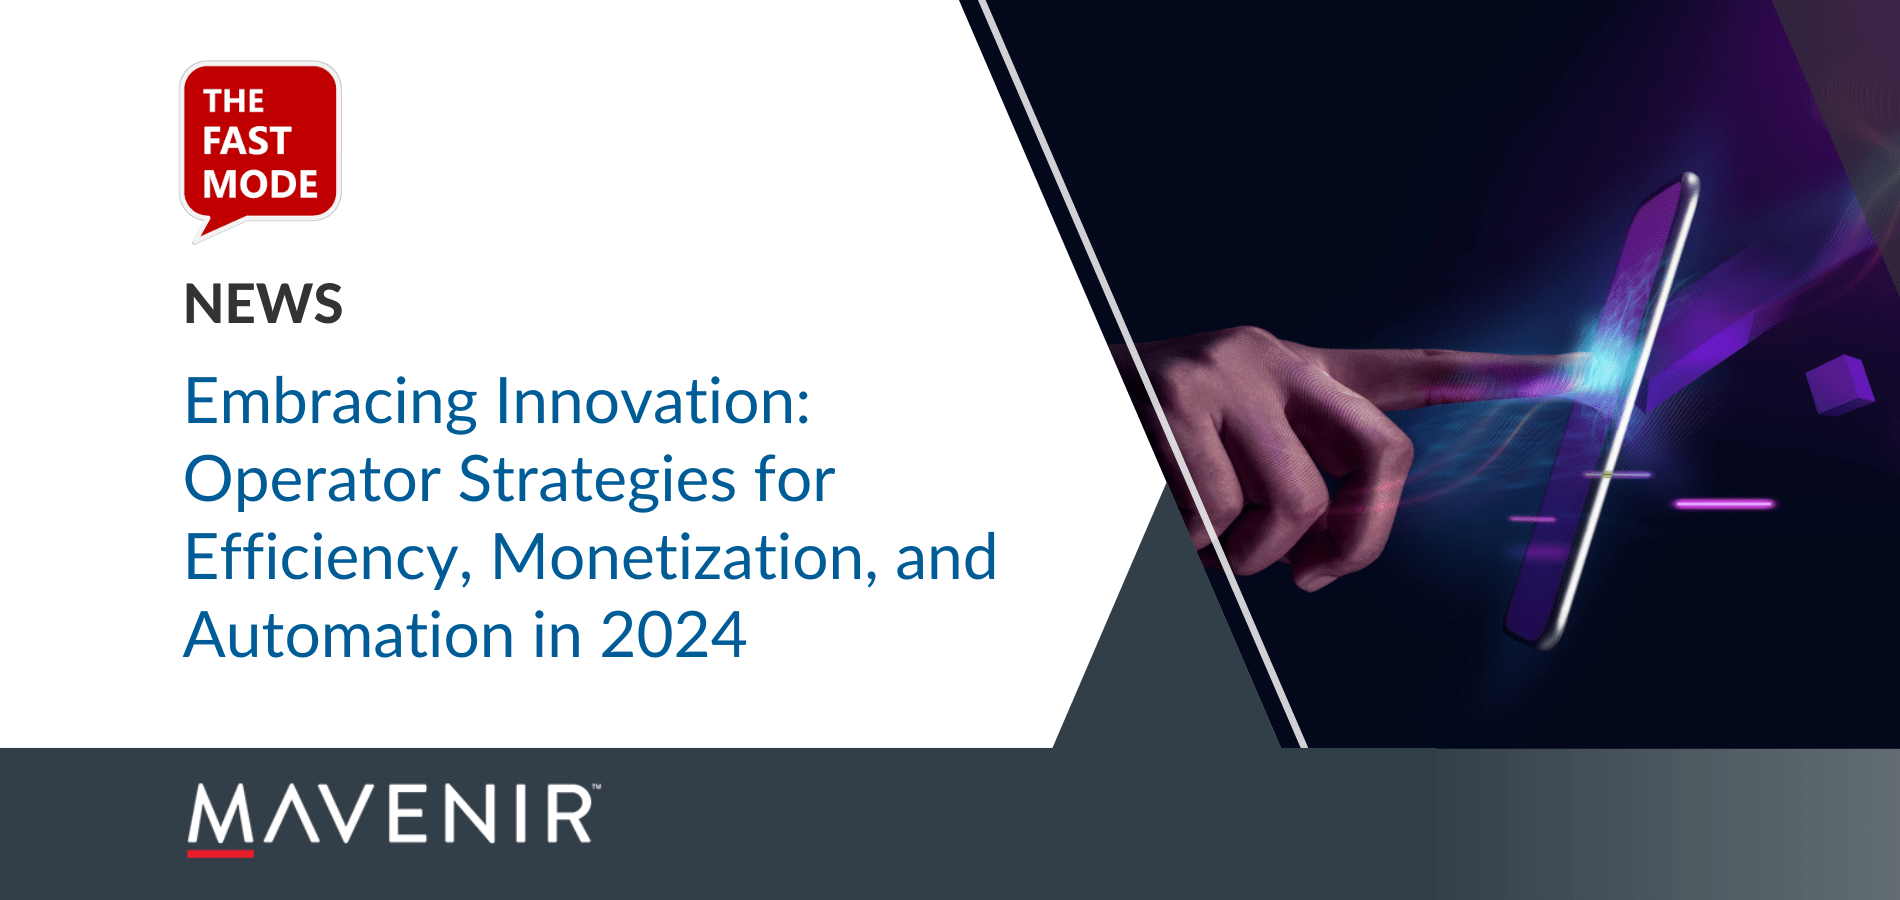 Embracing Innovation: Operator Strategies for Efficiency, Monetization, and Automation in 2024